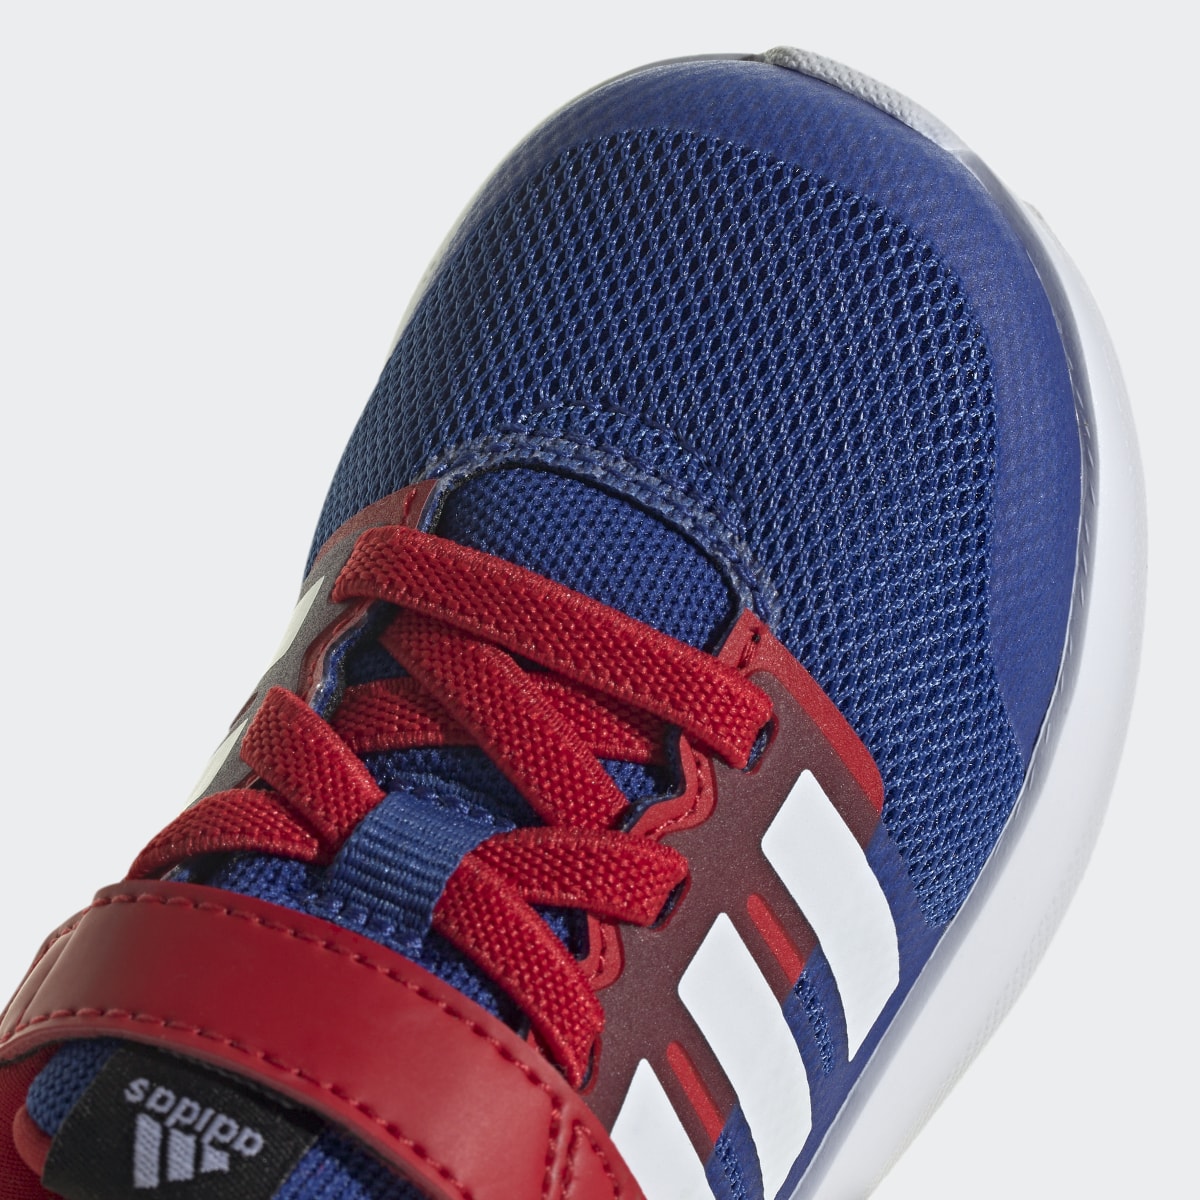 Adidas x Marvel FortaRun 2.0 Spider-Man Cloudfoam Sport Running Elastic Lace Top Strap Shoes. 10